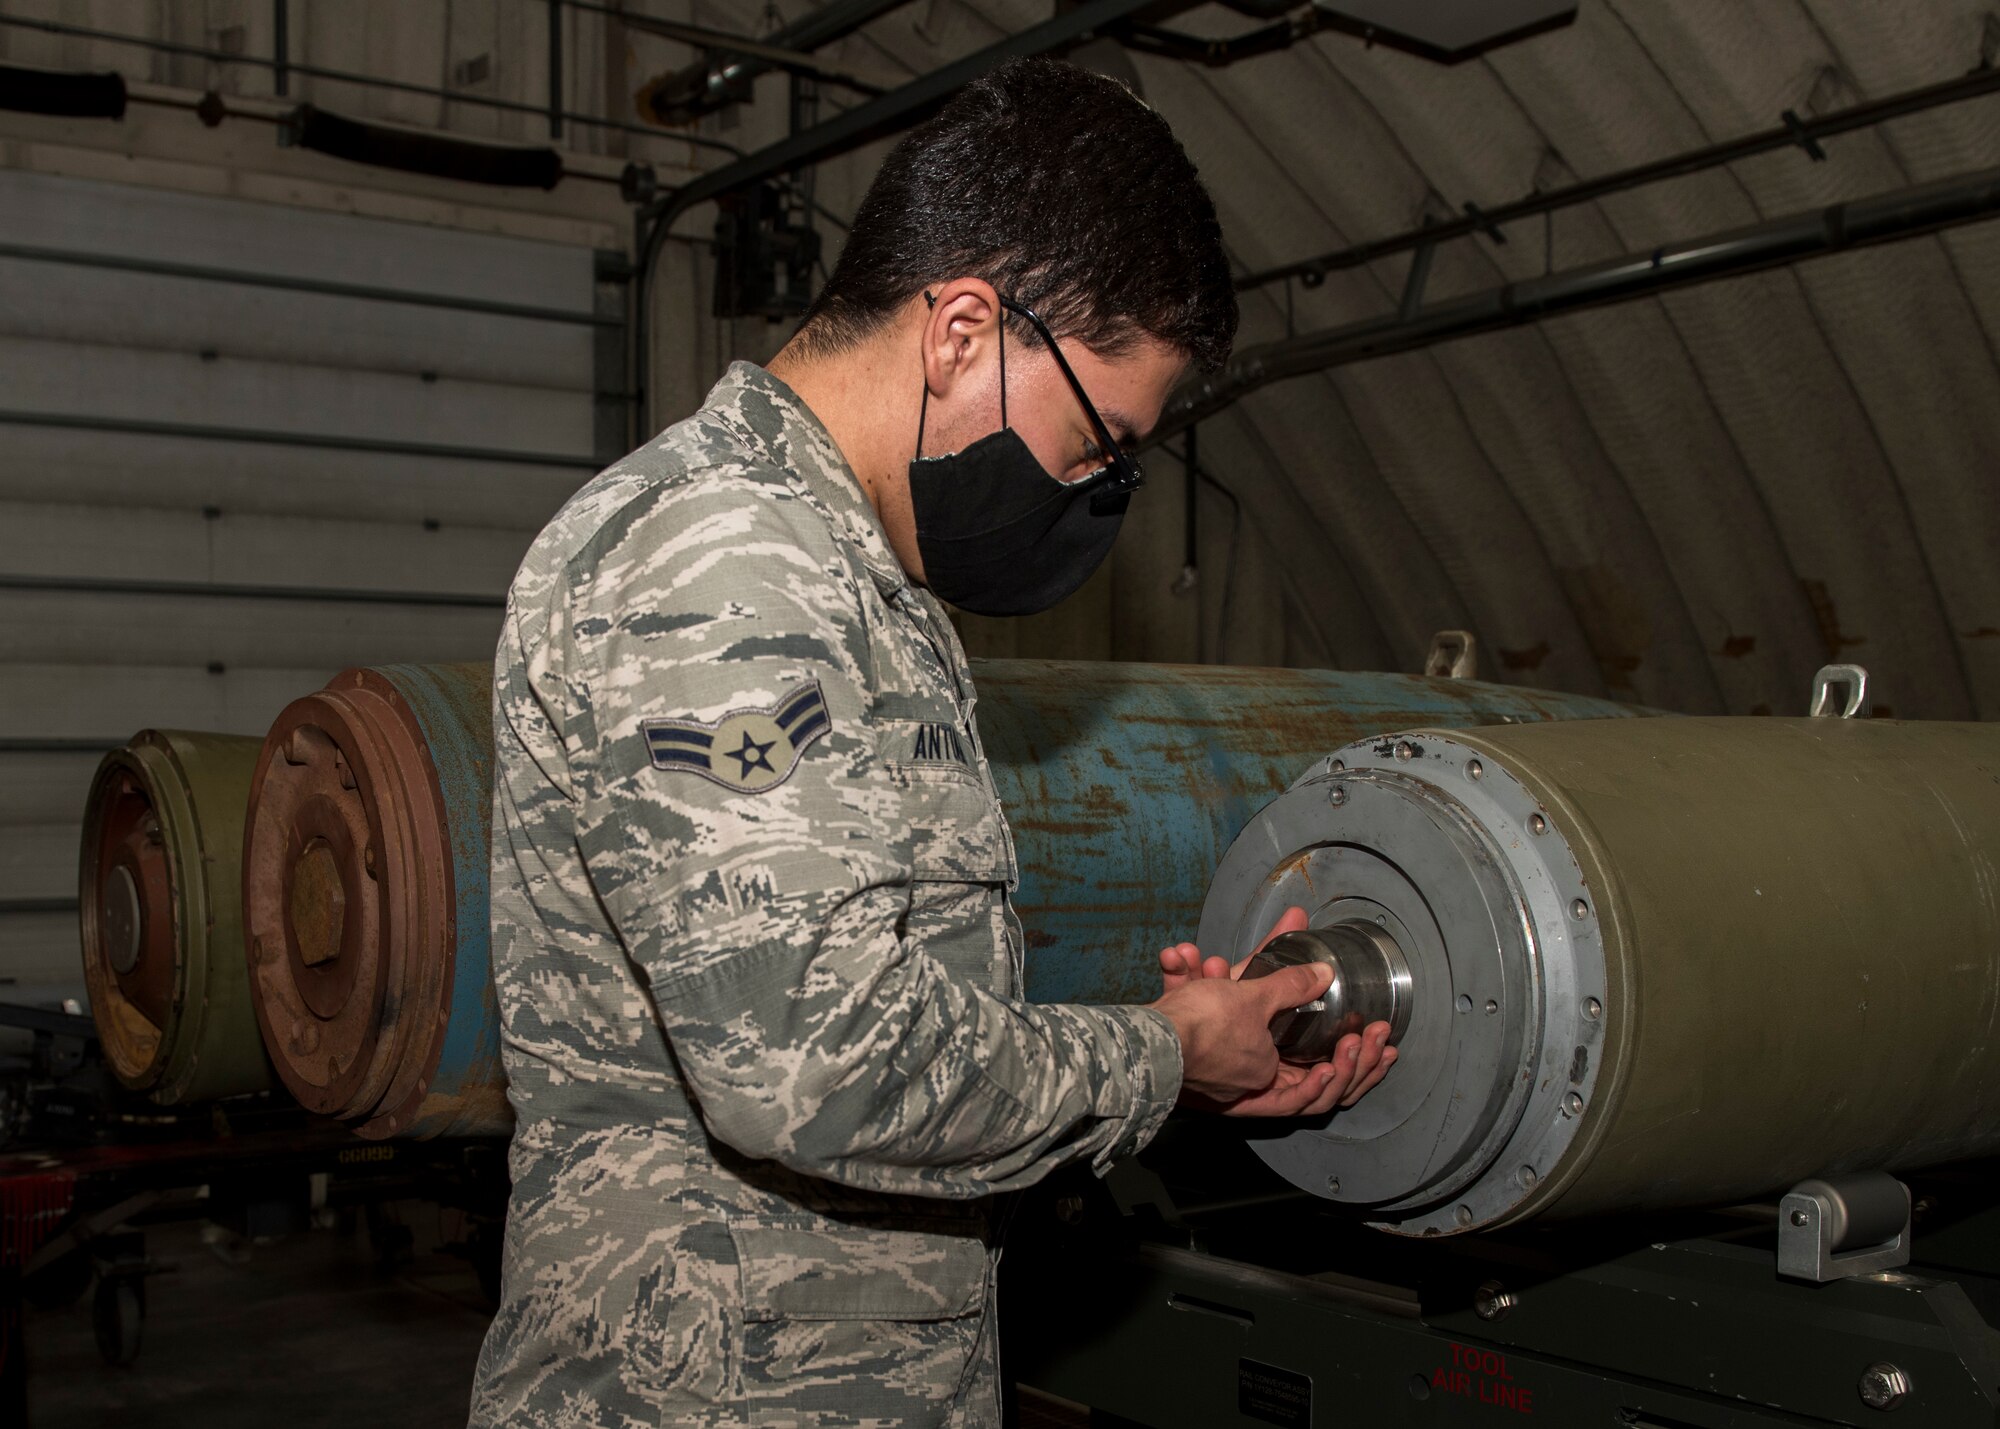 U.S. Air Force Airman 1st Class George Antuna, a 3rd Munitions Squadron precision guided munitions technician, disassembles an inert bomb at a combat munitions training class at Joint Base Elmendorf-Richardson, Alaska, Nov. 5, 2020. U.S. Air Force Tech. Sgt. Nicholas Kern, the 3rd MUNS training section chief, revamped his squadron’s training section and implemented an expanded CMT program that familiarizes ammo troops with a variety of munitions in one location.